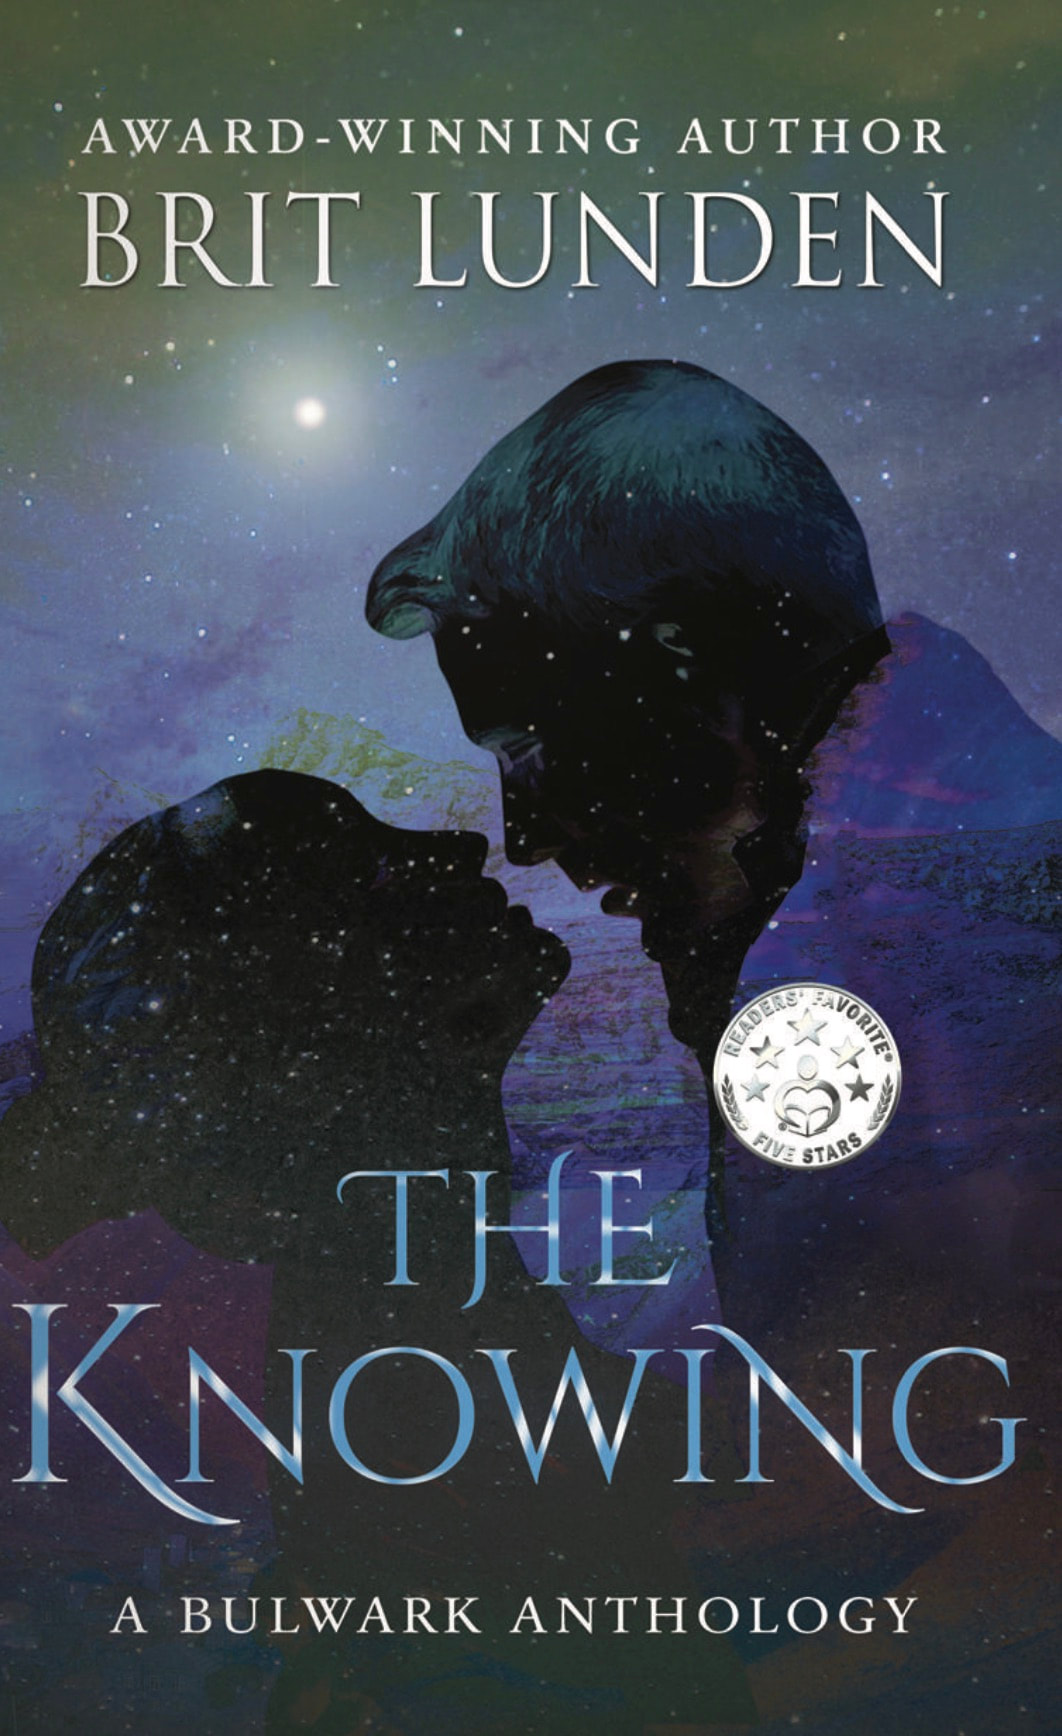 THE KNOWING by Brit Lunden